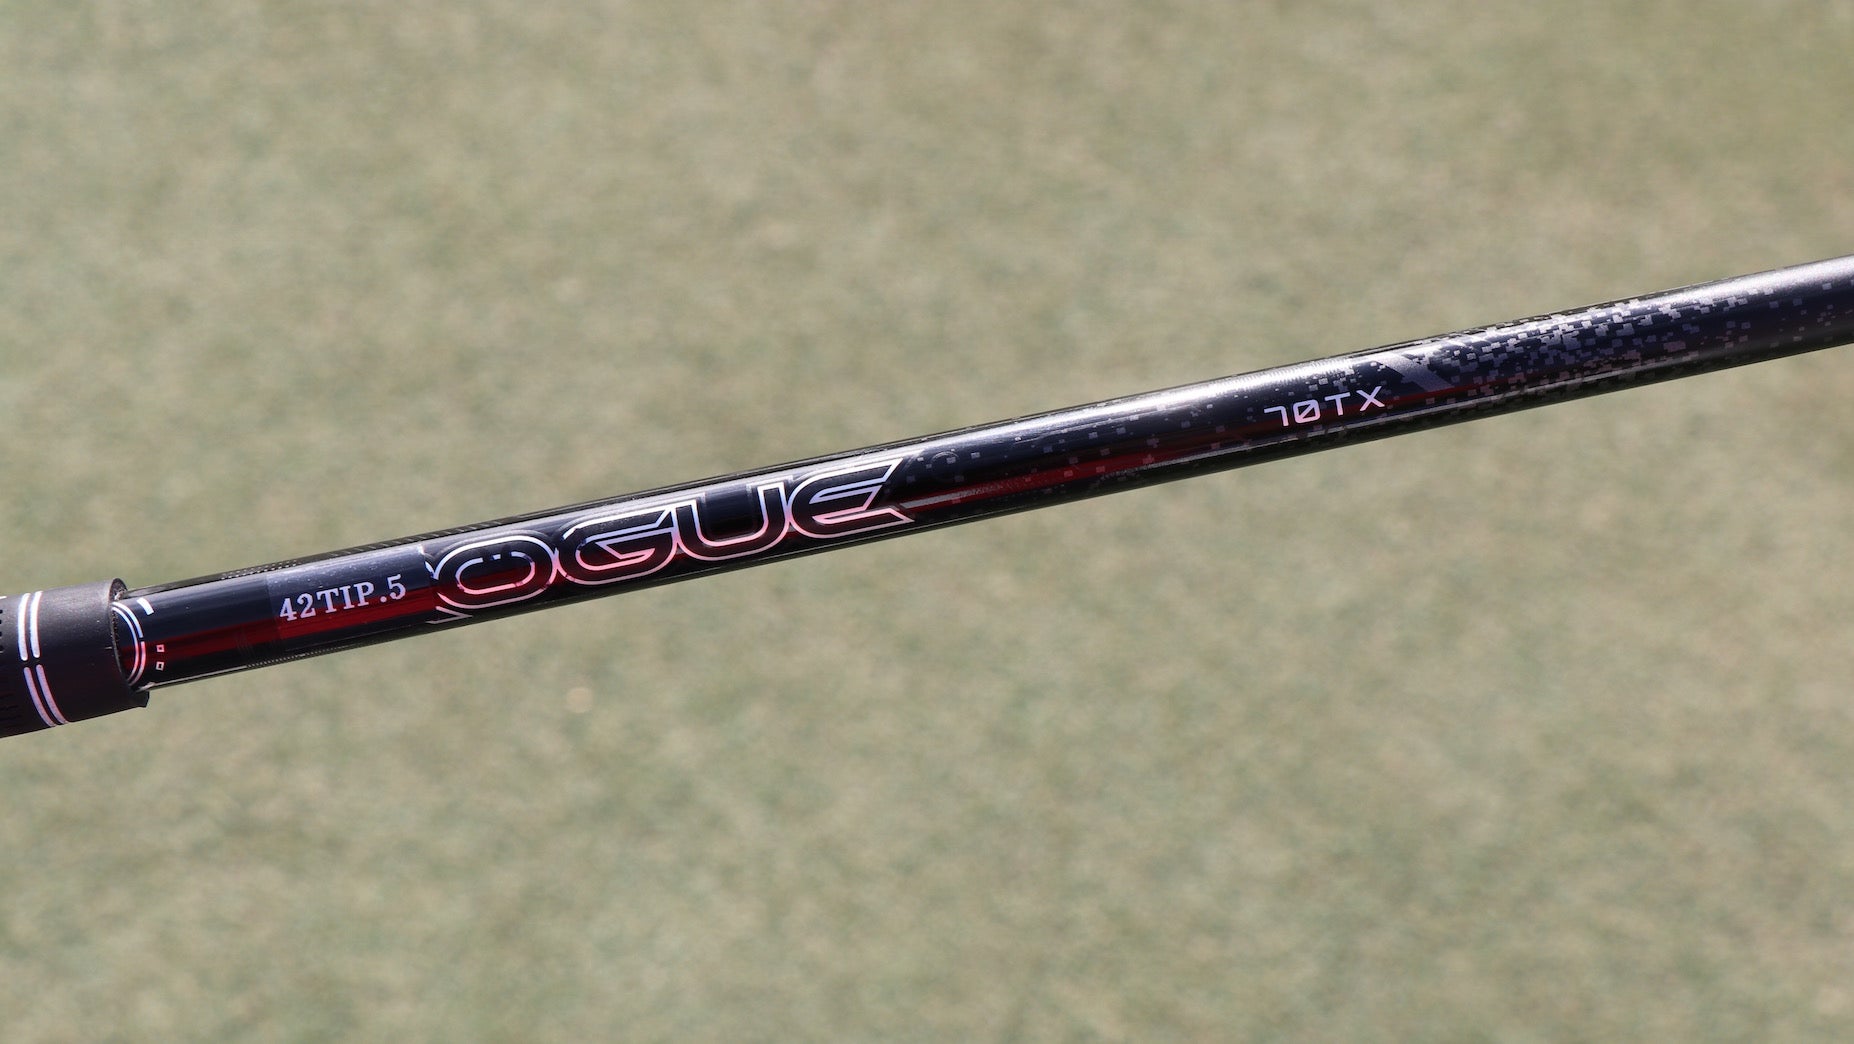 5 factors to help you find the perfect driver shaft for your swing